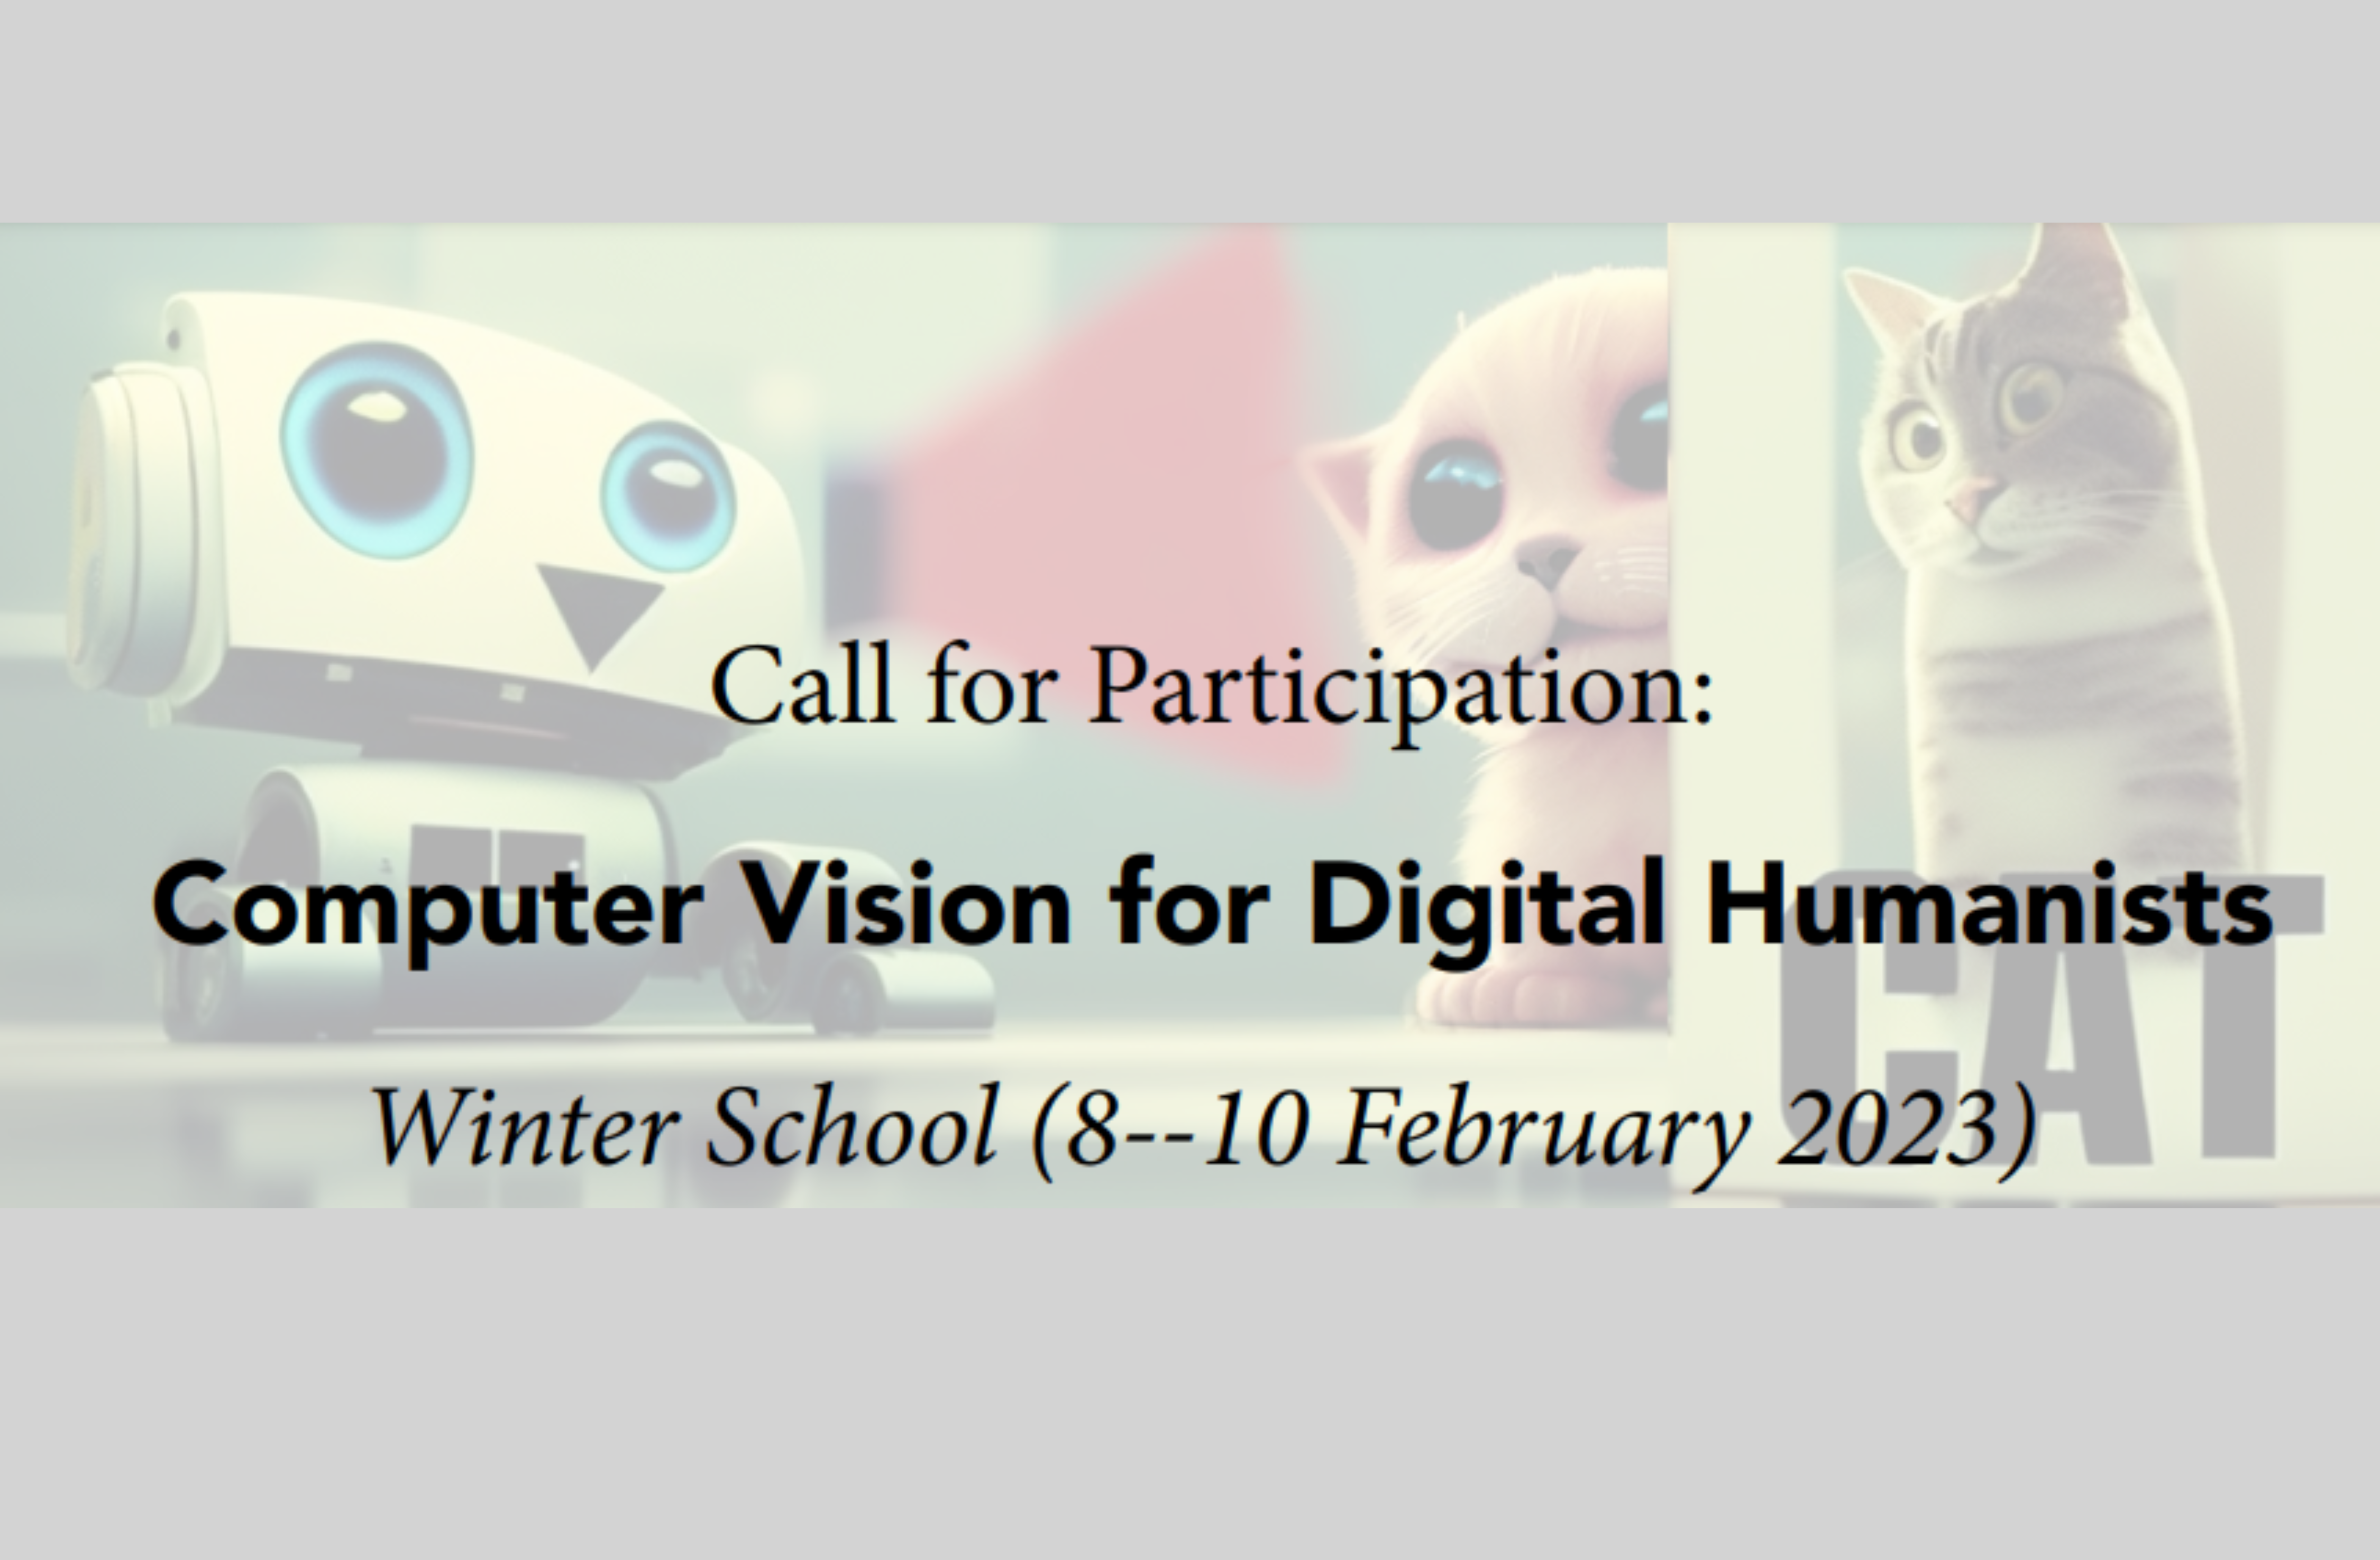 Computer Vision for Digital Humanists: A three-Day Winter School hosted by the University of Graz